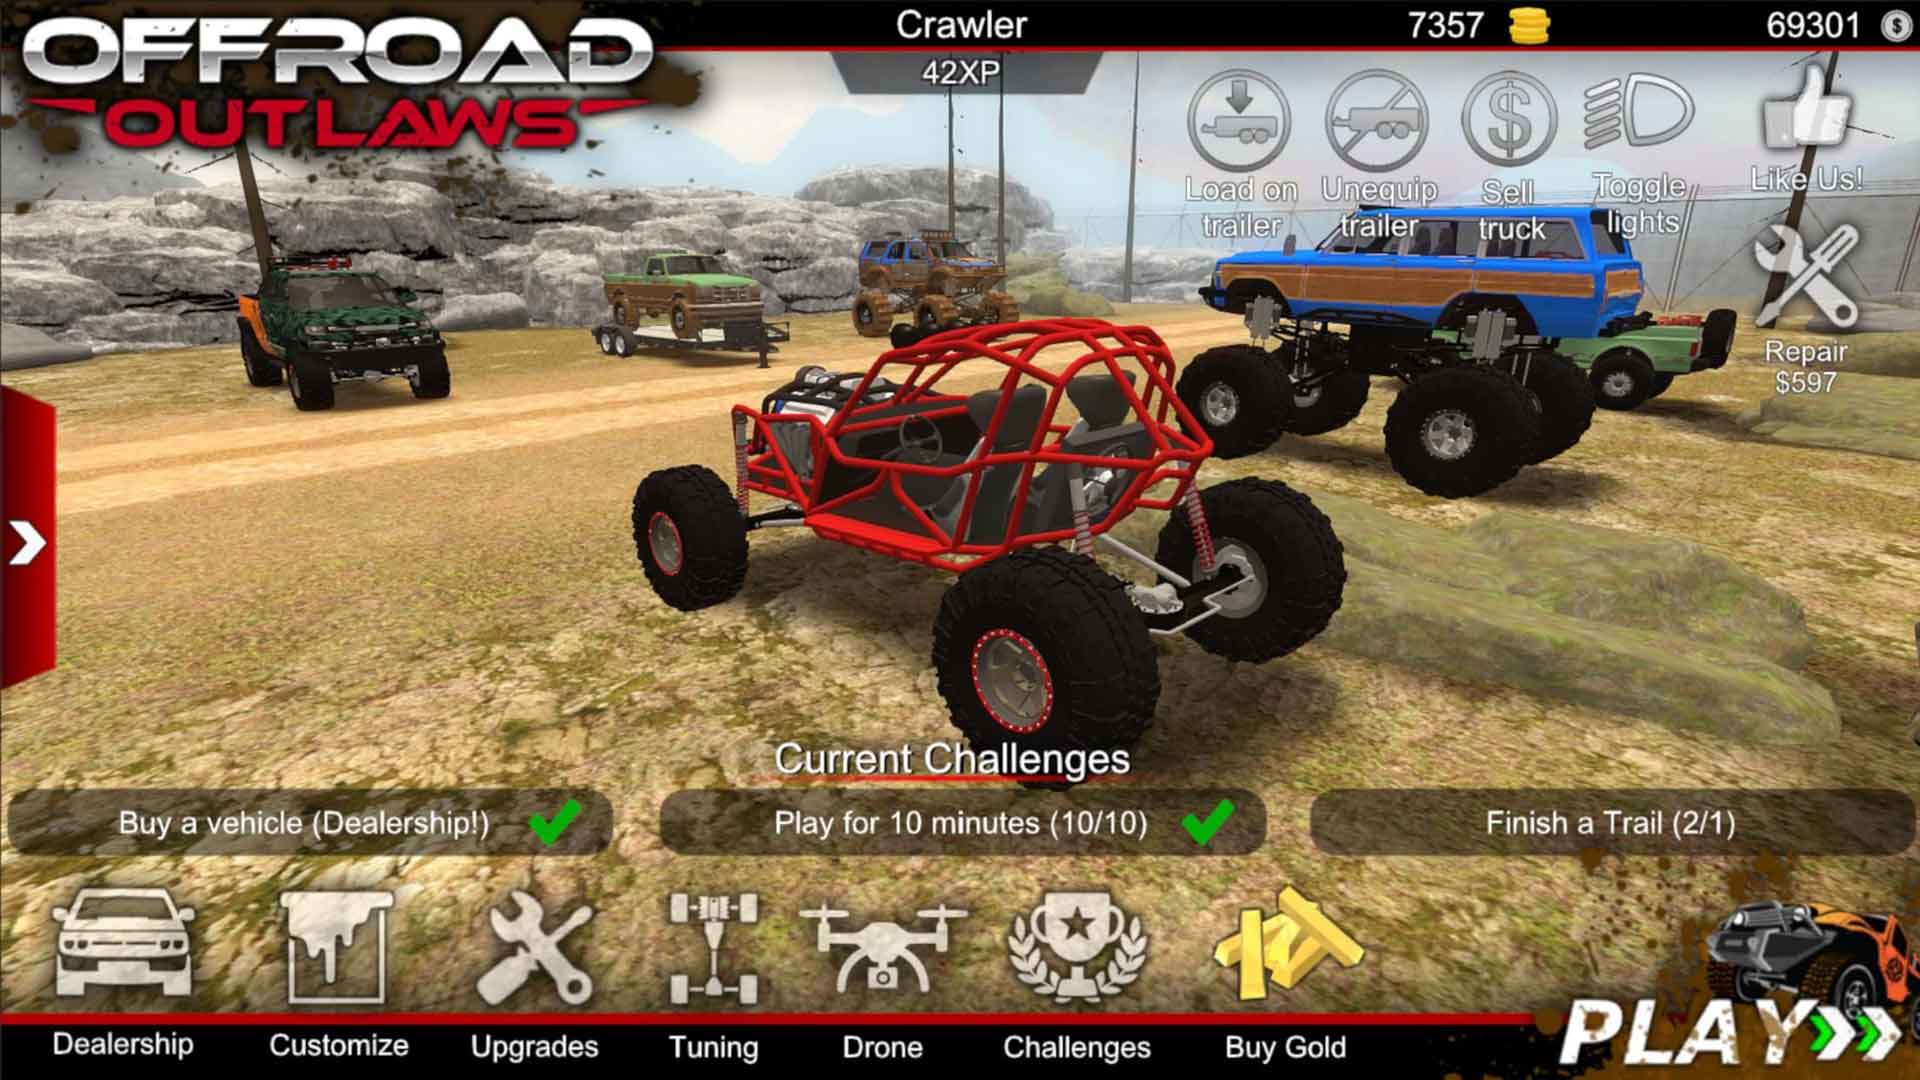 Offroad Outlaws Screnshot 1